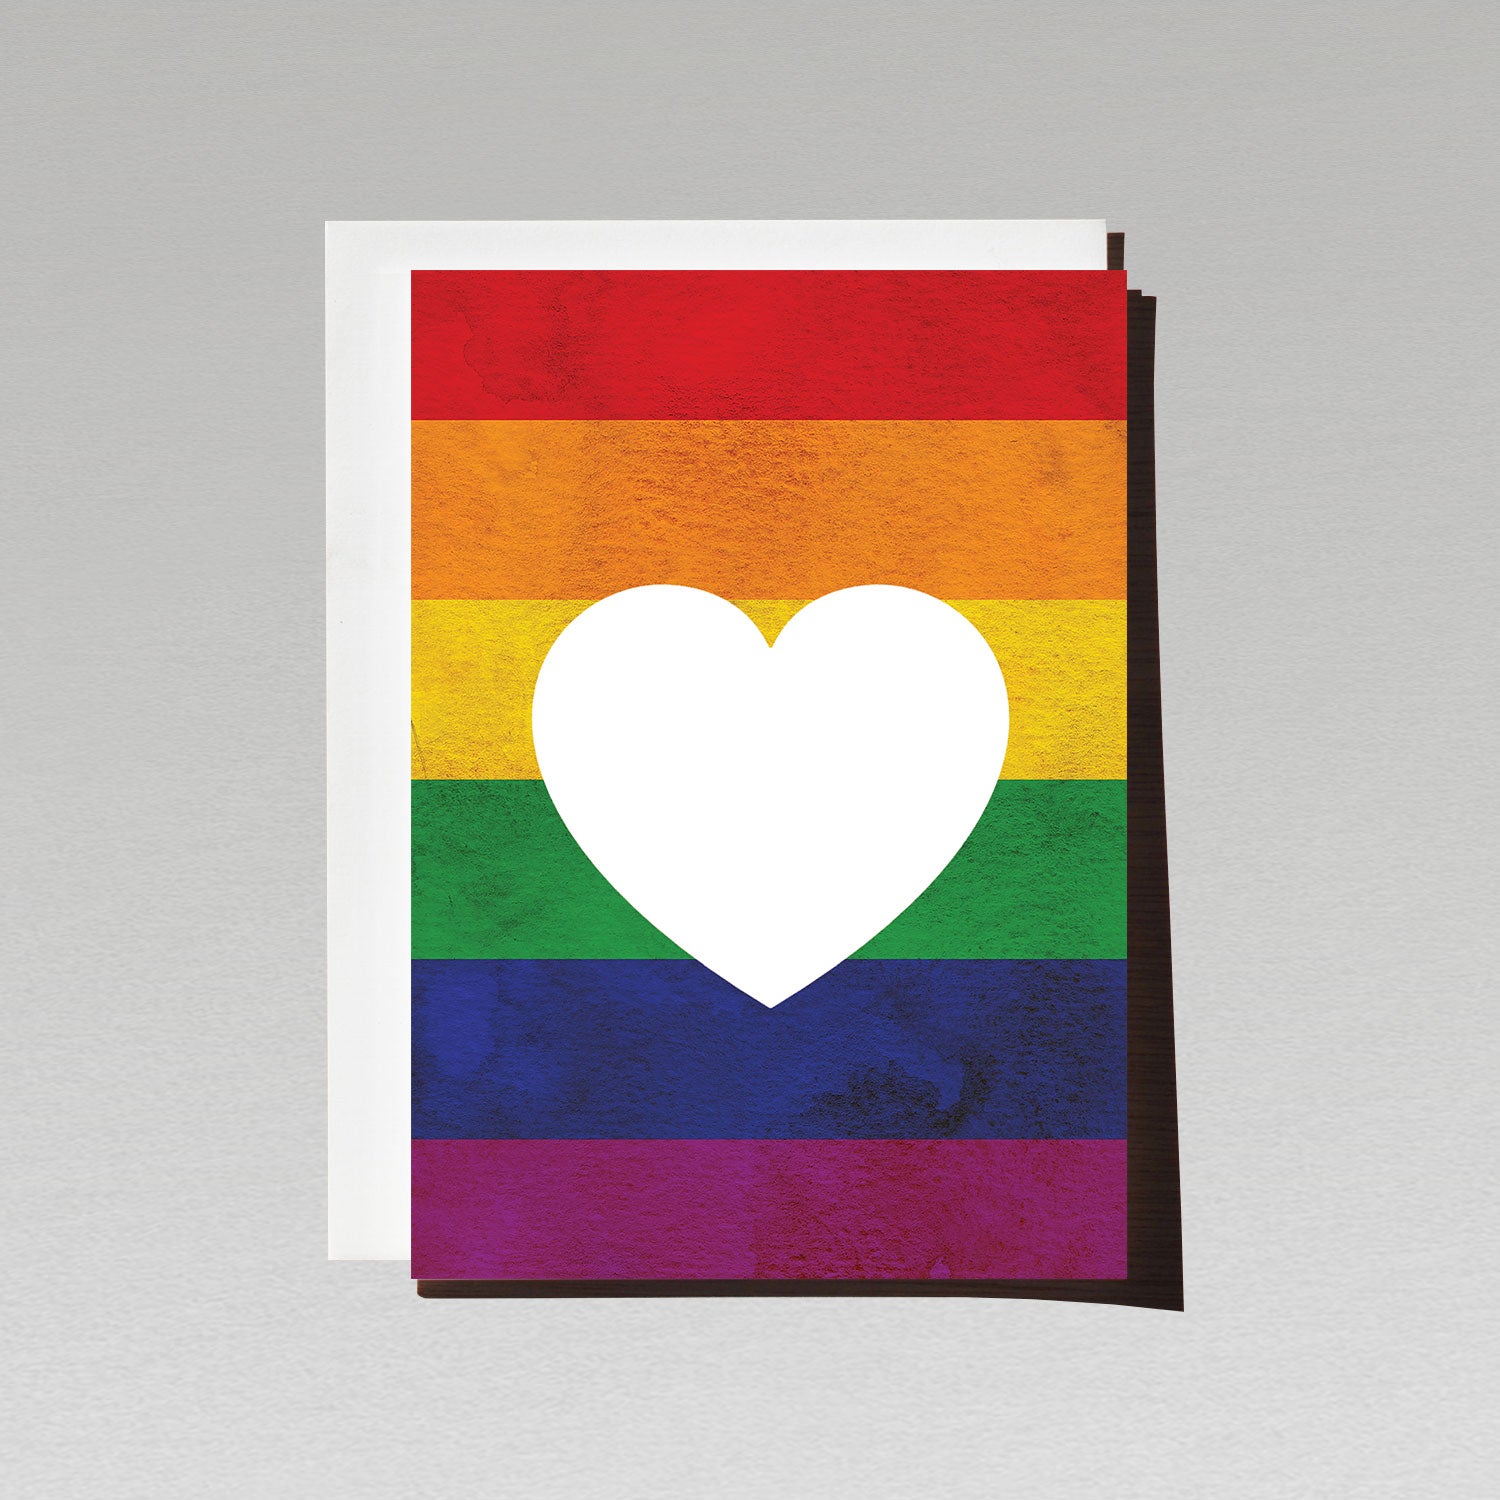 Greeting card with large white love heart sitting on LGBTQI rainbow flag background